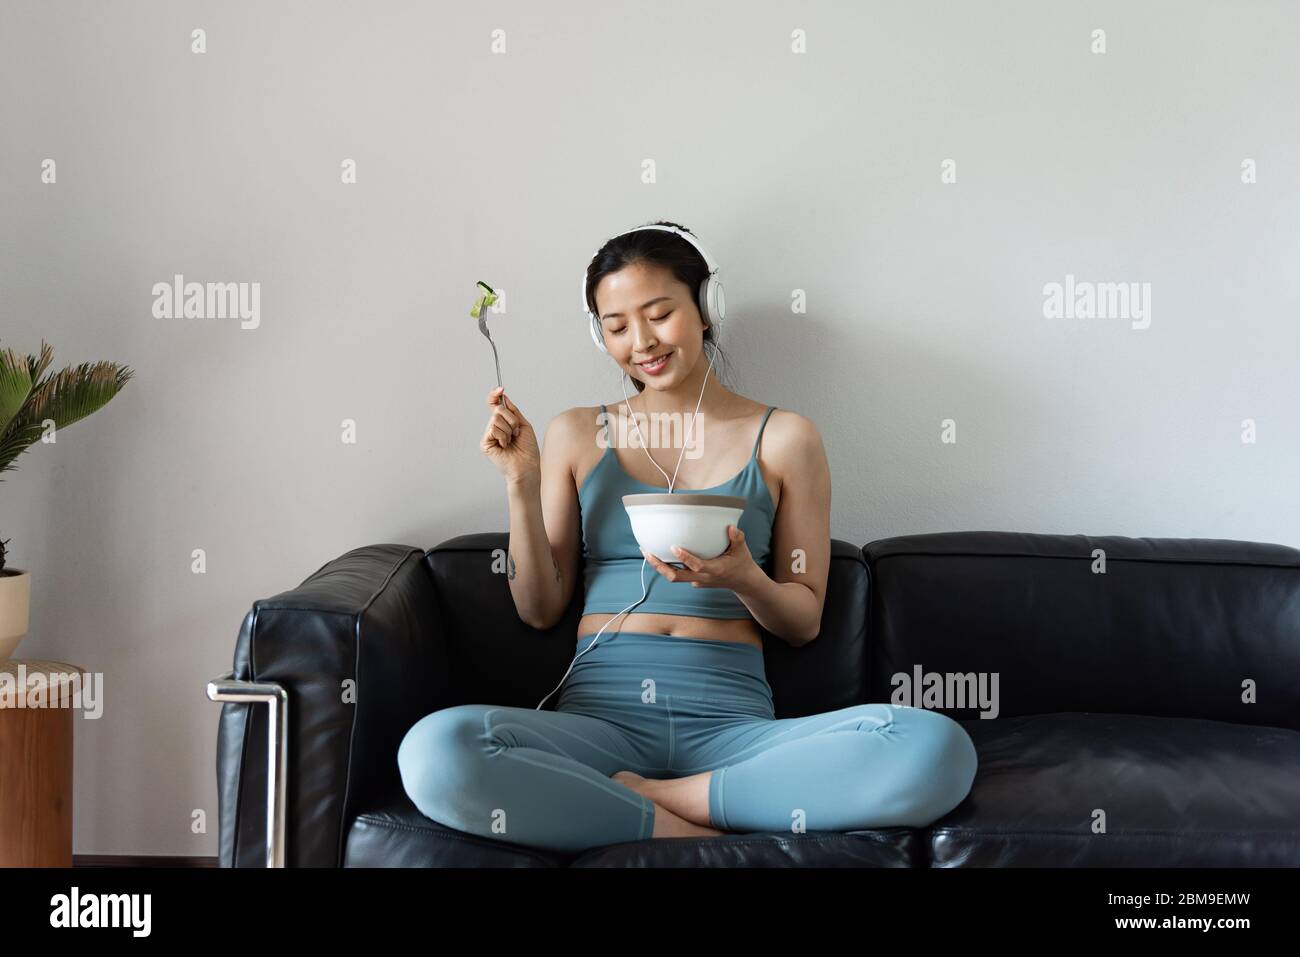 A young Asian woman eating a healthy vegetable salad in the living room Stock Photo